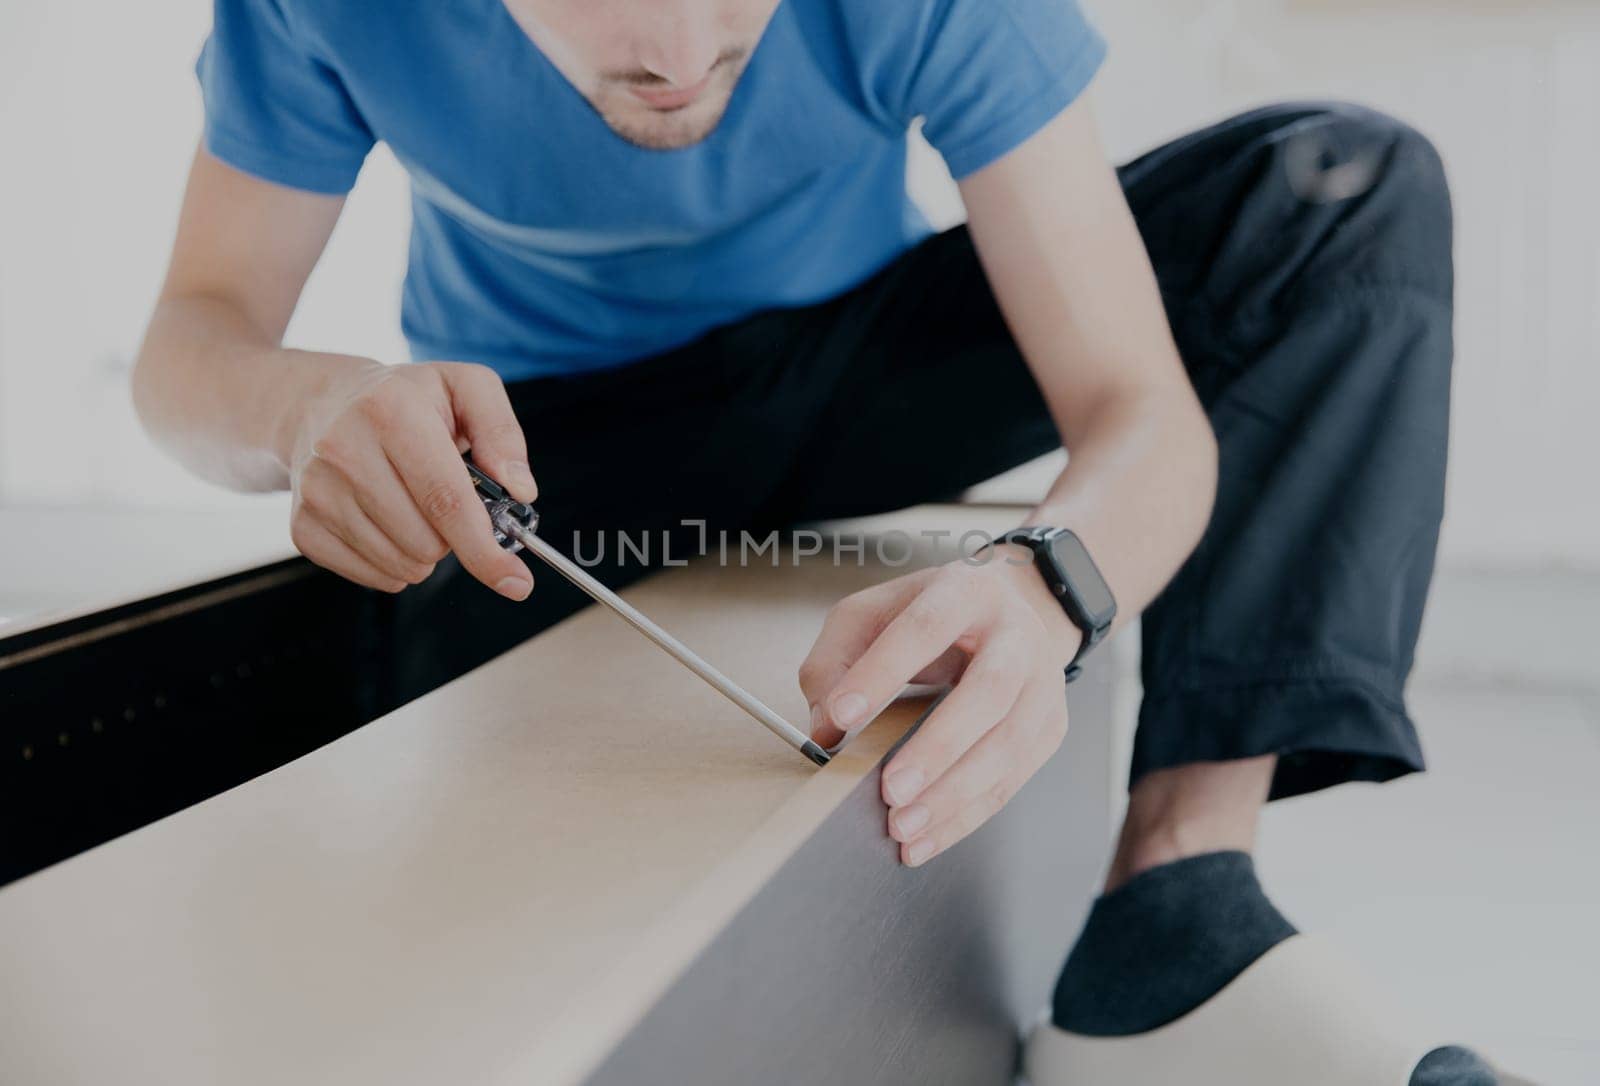 One young Caucasian man in a blue T-shirt and black pants screws a screw into the broken back wall of an old wardrobe with a screwdriver, close-up side view.